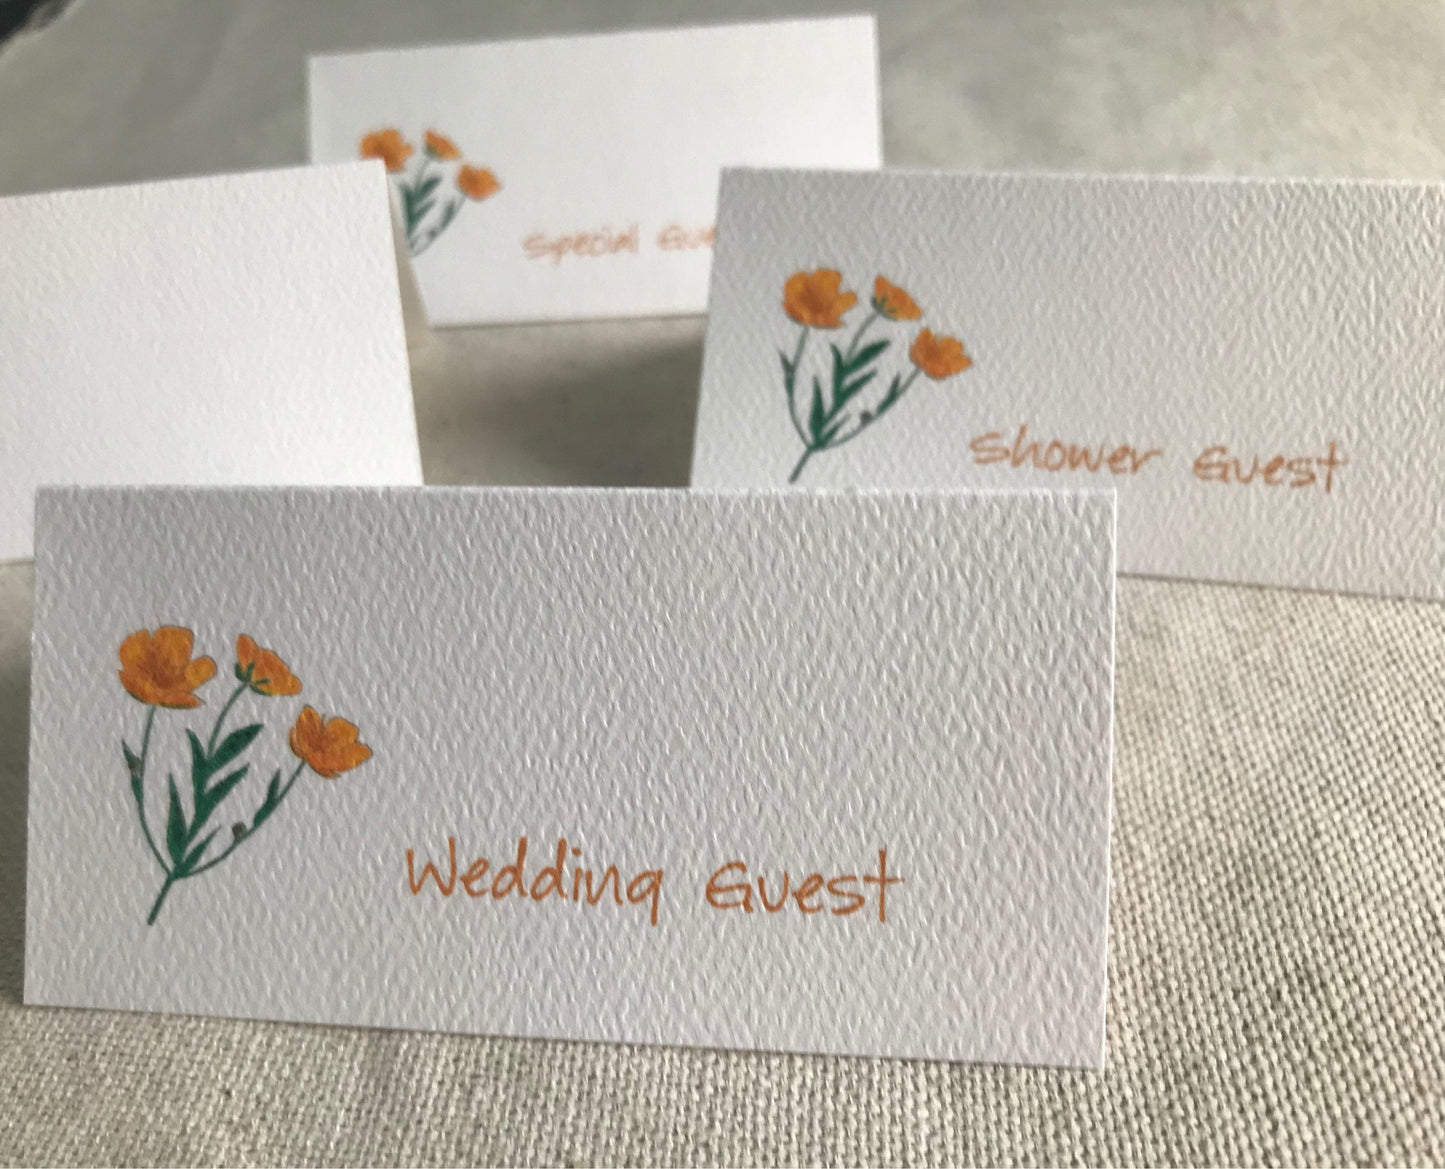 Buttercup Flowers Place Cards, Tented Cards, Personalized Seating, Blank Name Cards, Wedding Event Cards, Tented Cards, Bridal Shower, Party.